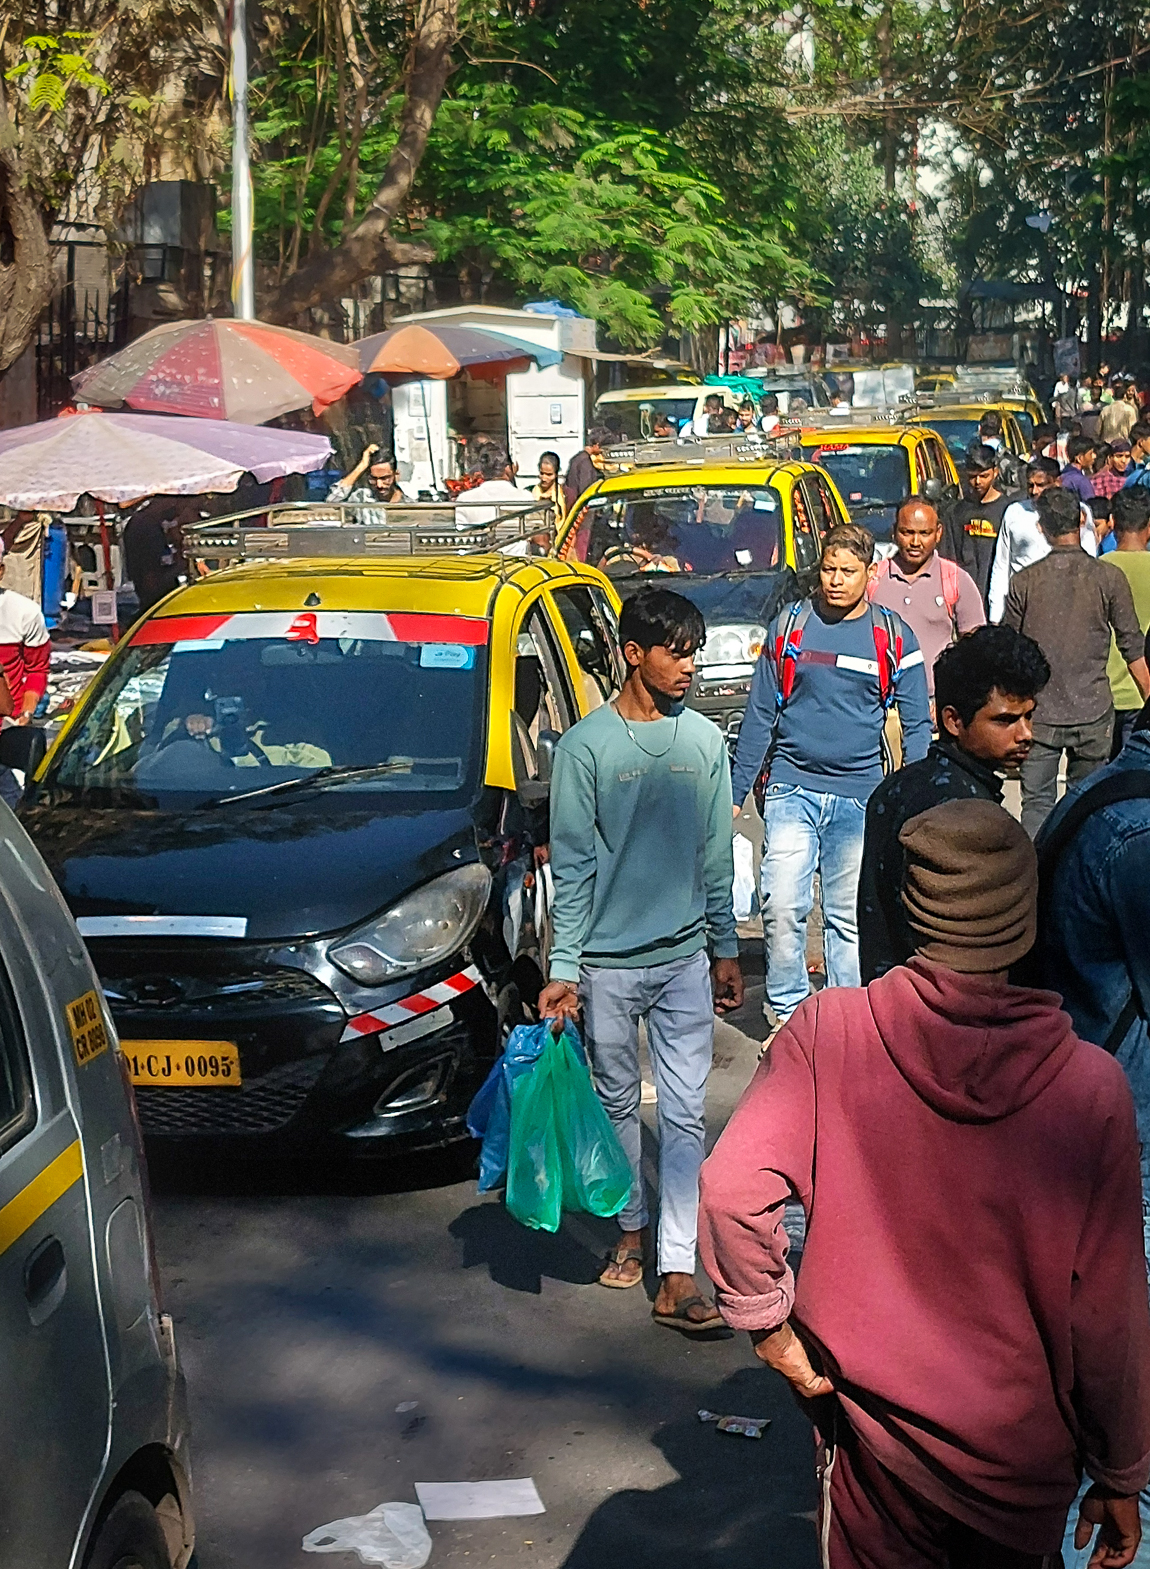 <span  class="uc_style_uc_tiles_grid_image_elementor_uc_items_attribute_title" style="color:#ffffff;">Mumbai: street life</span>